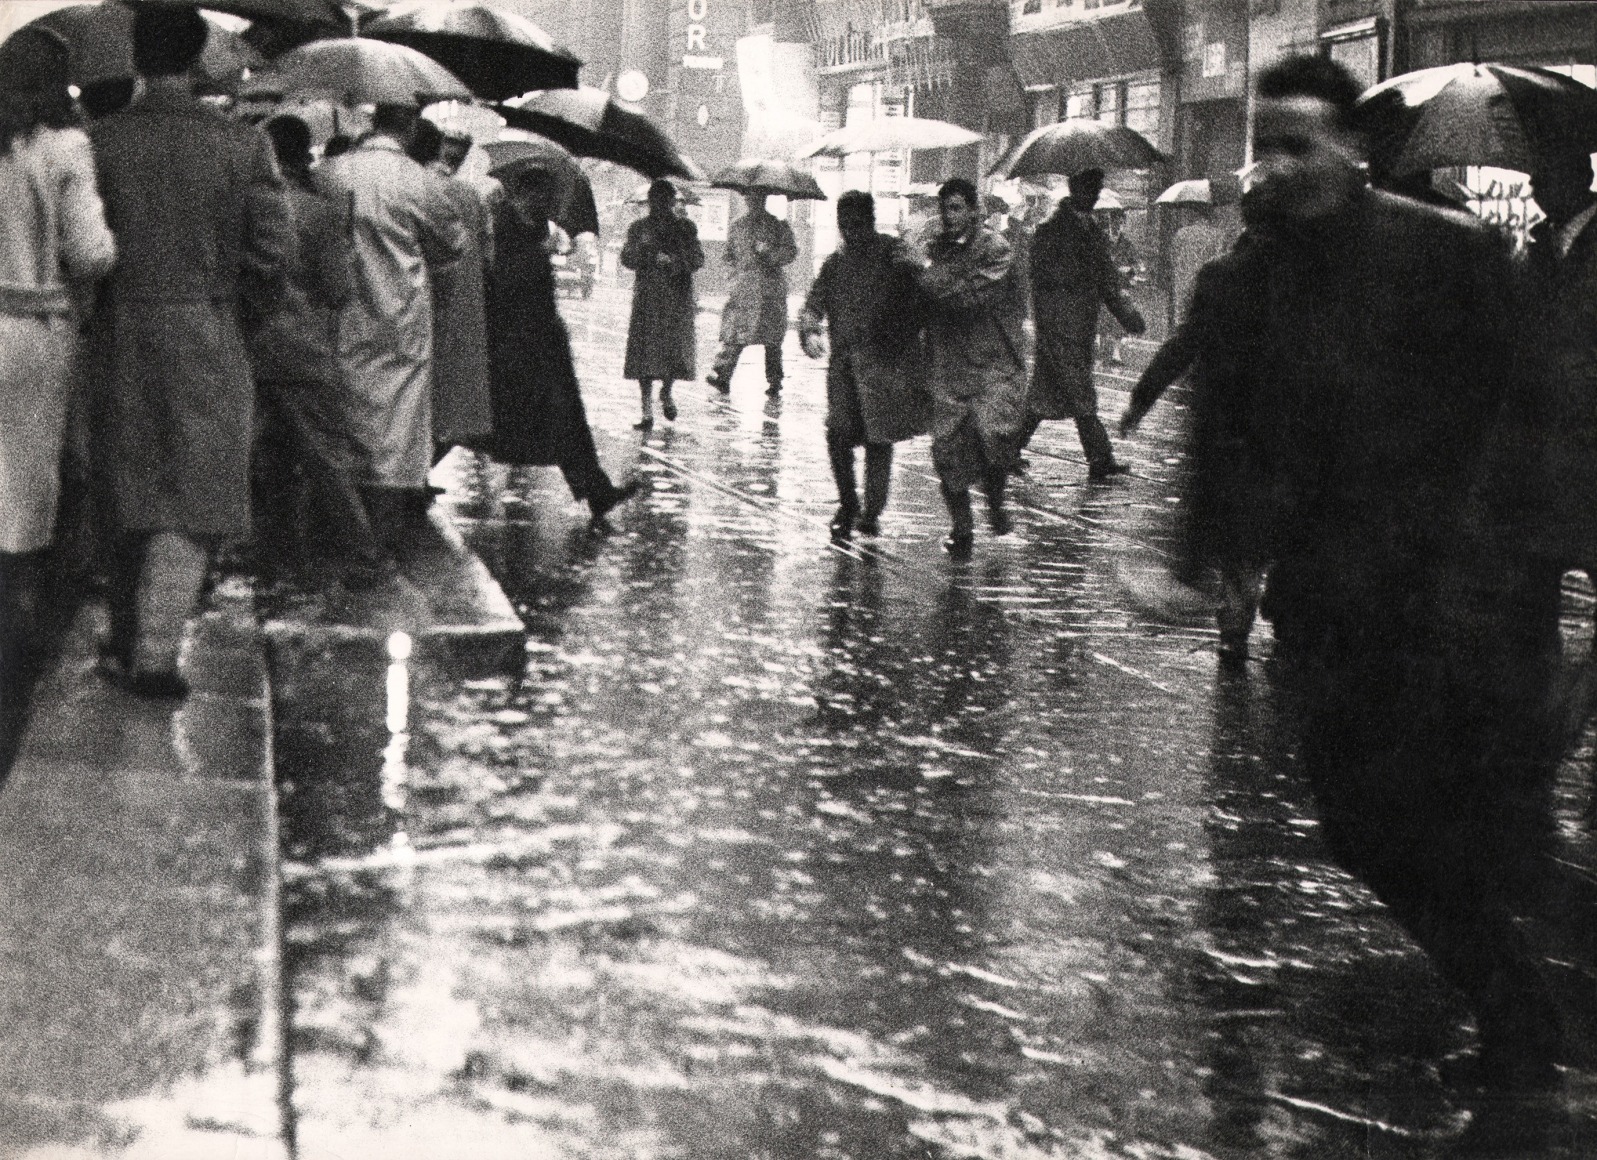 Cesare Colombo, Milano, ​1958. Street scene with many figures hurrying through the rain with umbrellas.